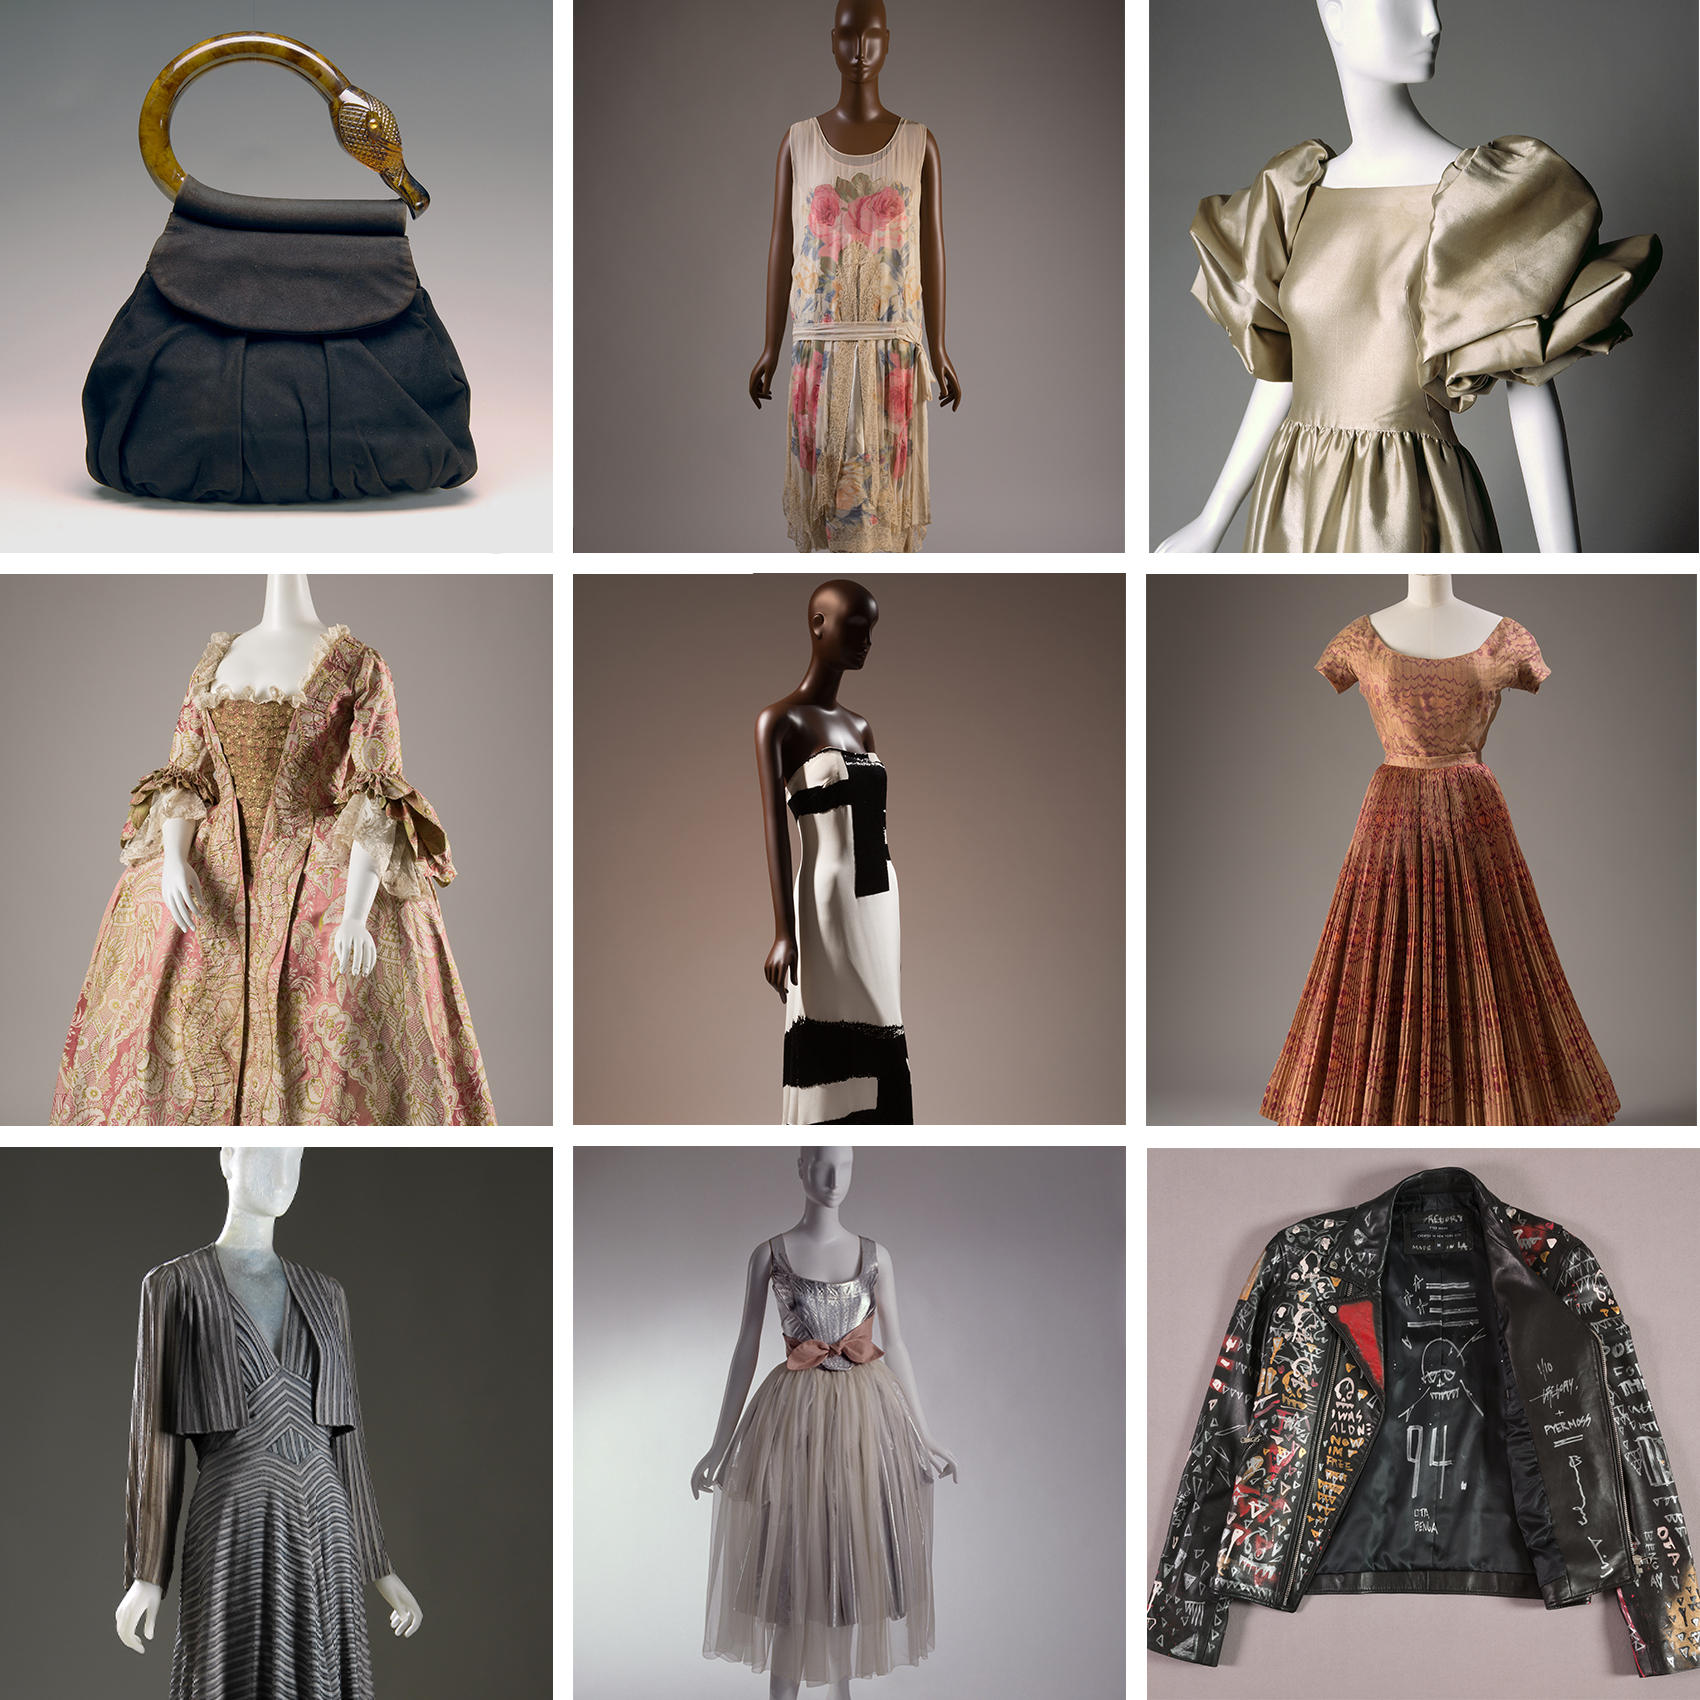 Fashion Institute of Technology Virtual Tour and Interactive